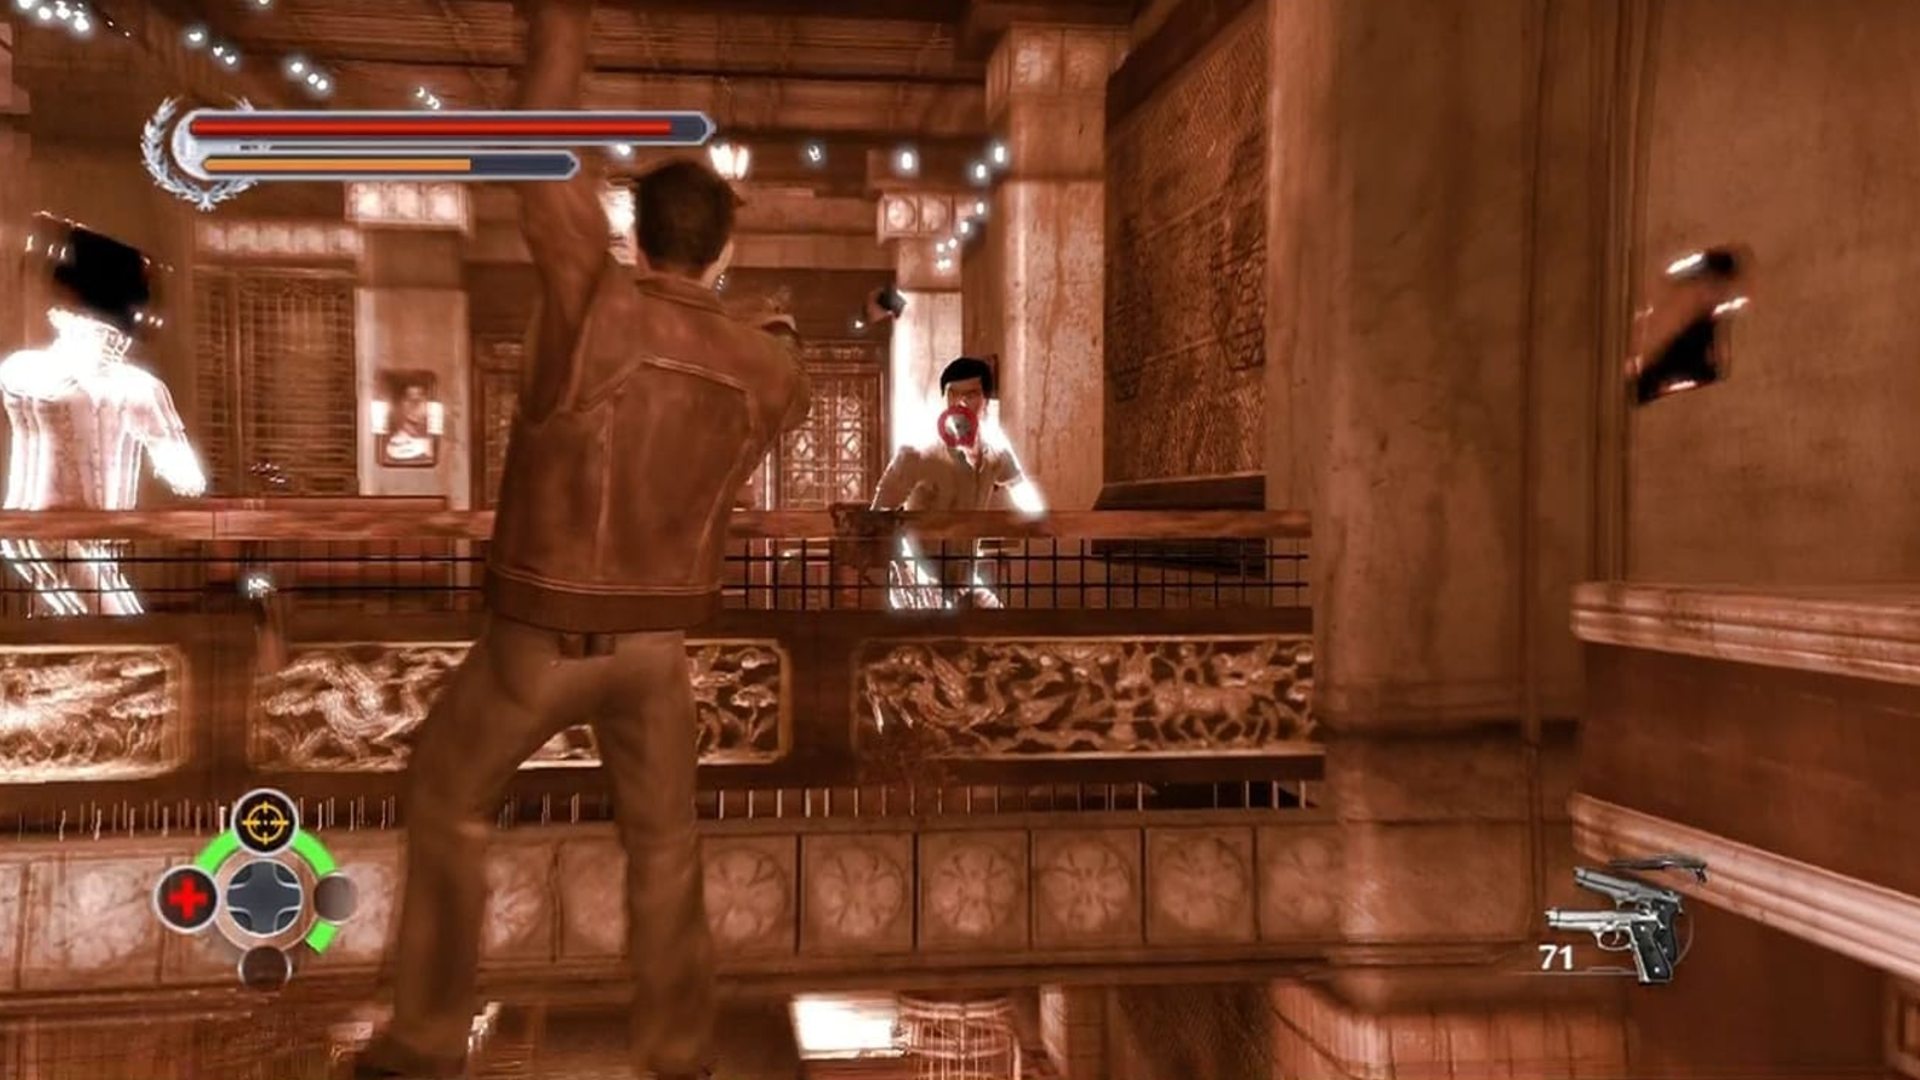 The player can be seen shooting some weapons